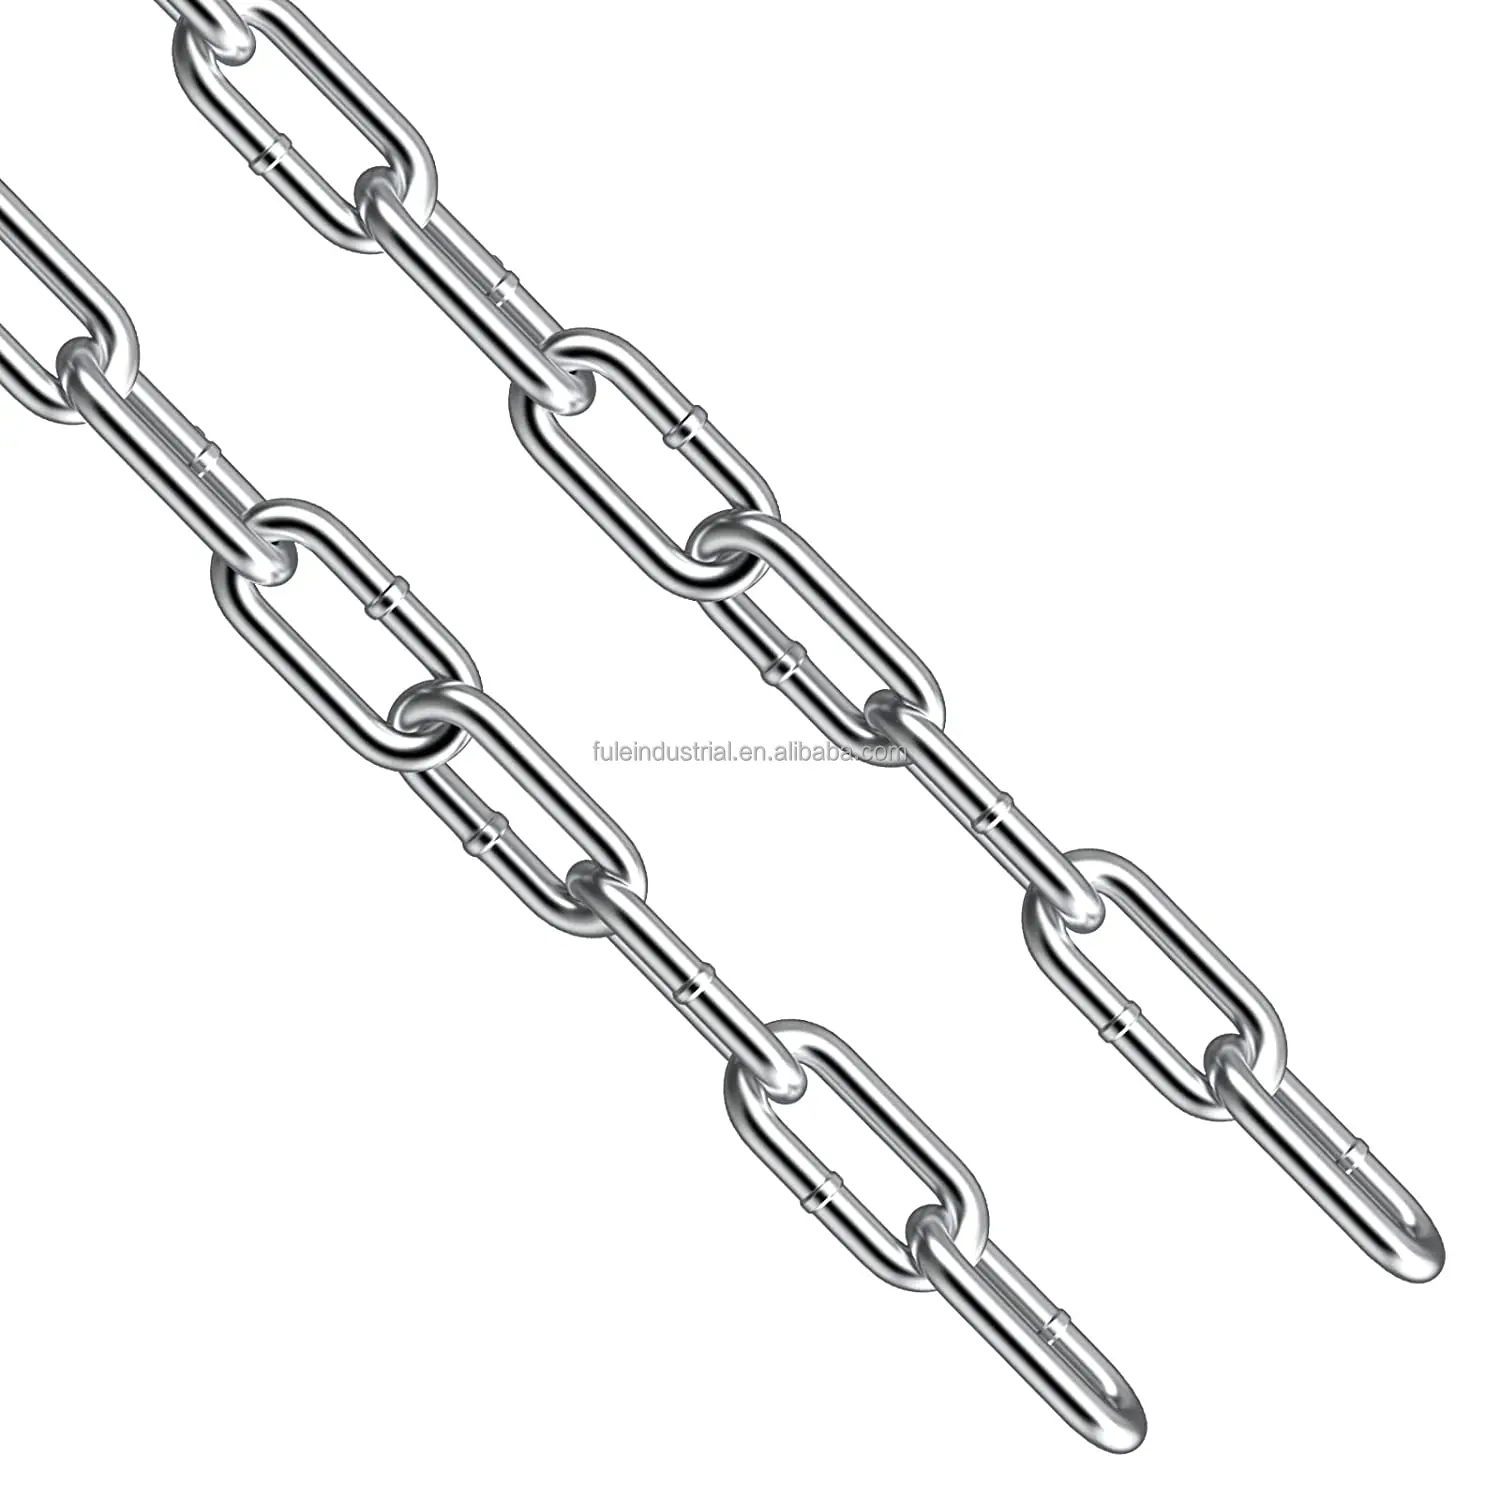 Heavy Duty adjustable Anticorrosive 5/32in 4mm 304 stainless steel Sailboat Yacht Metal Chain safe stainless steel chain link